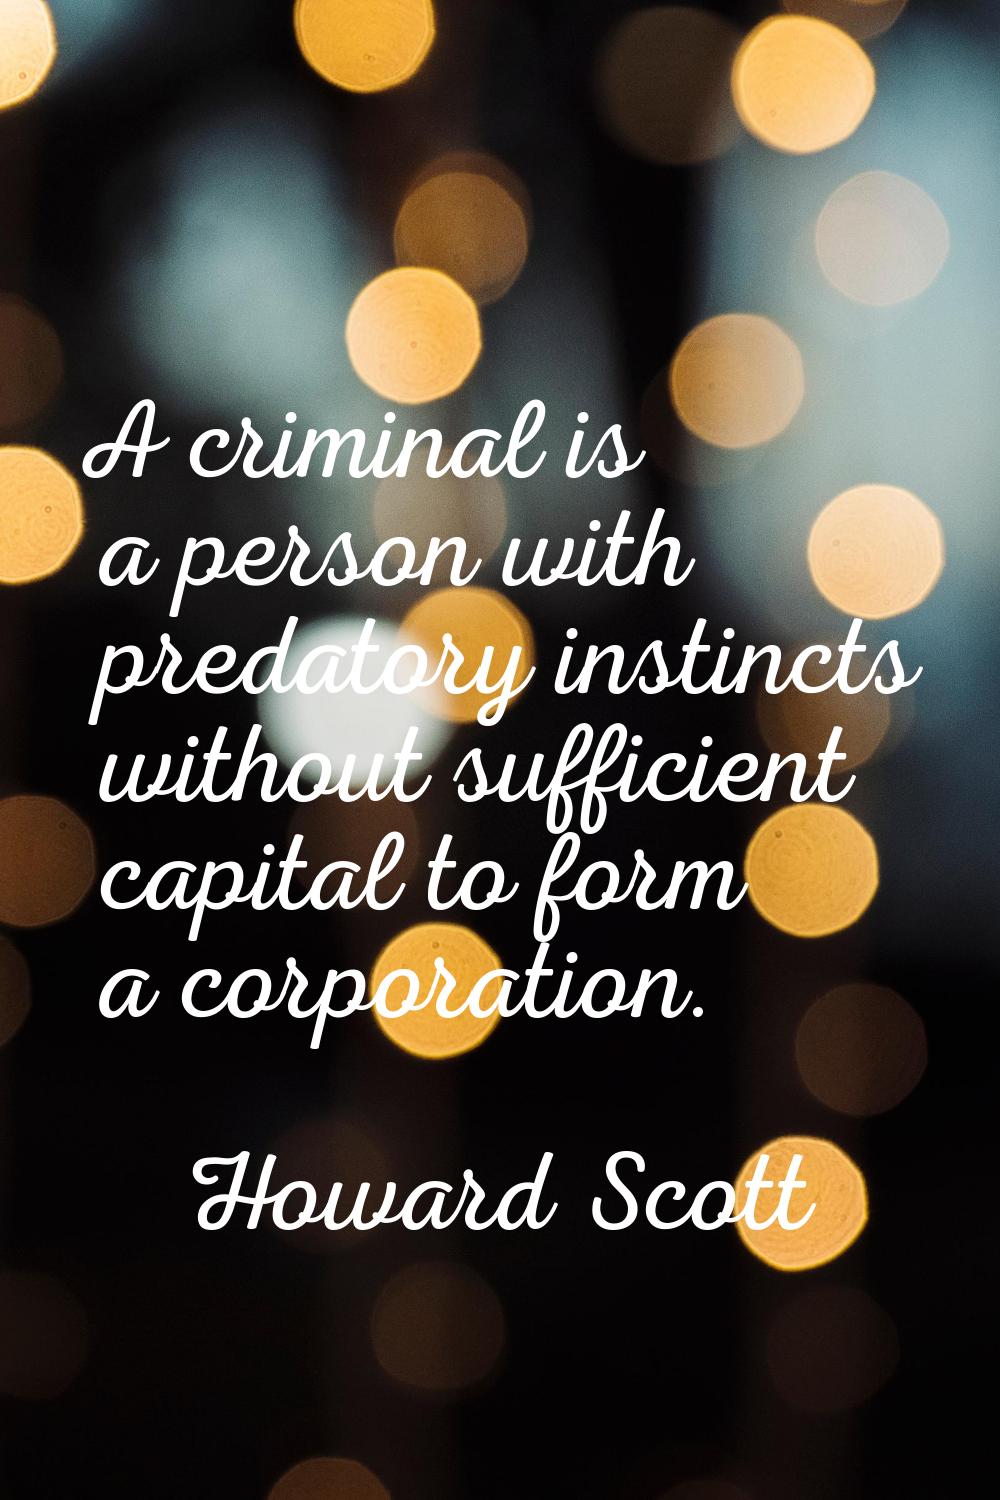 A criminal is a person with predatory instincts without sufficient capital to form a corporation.